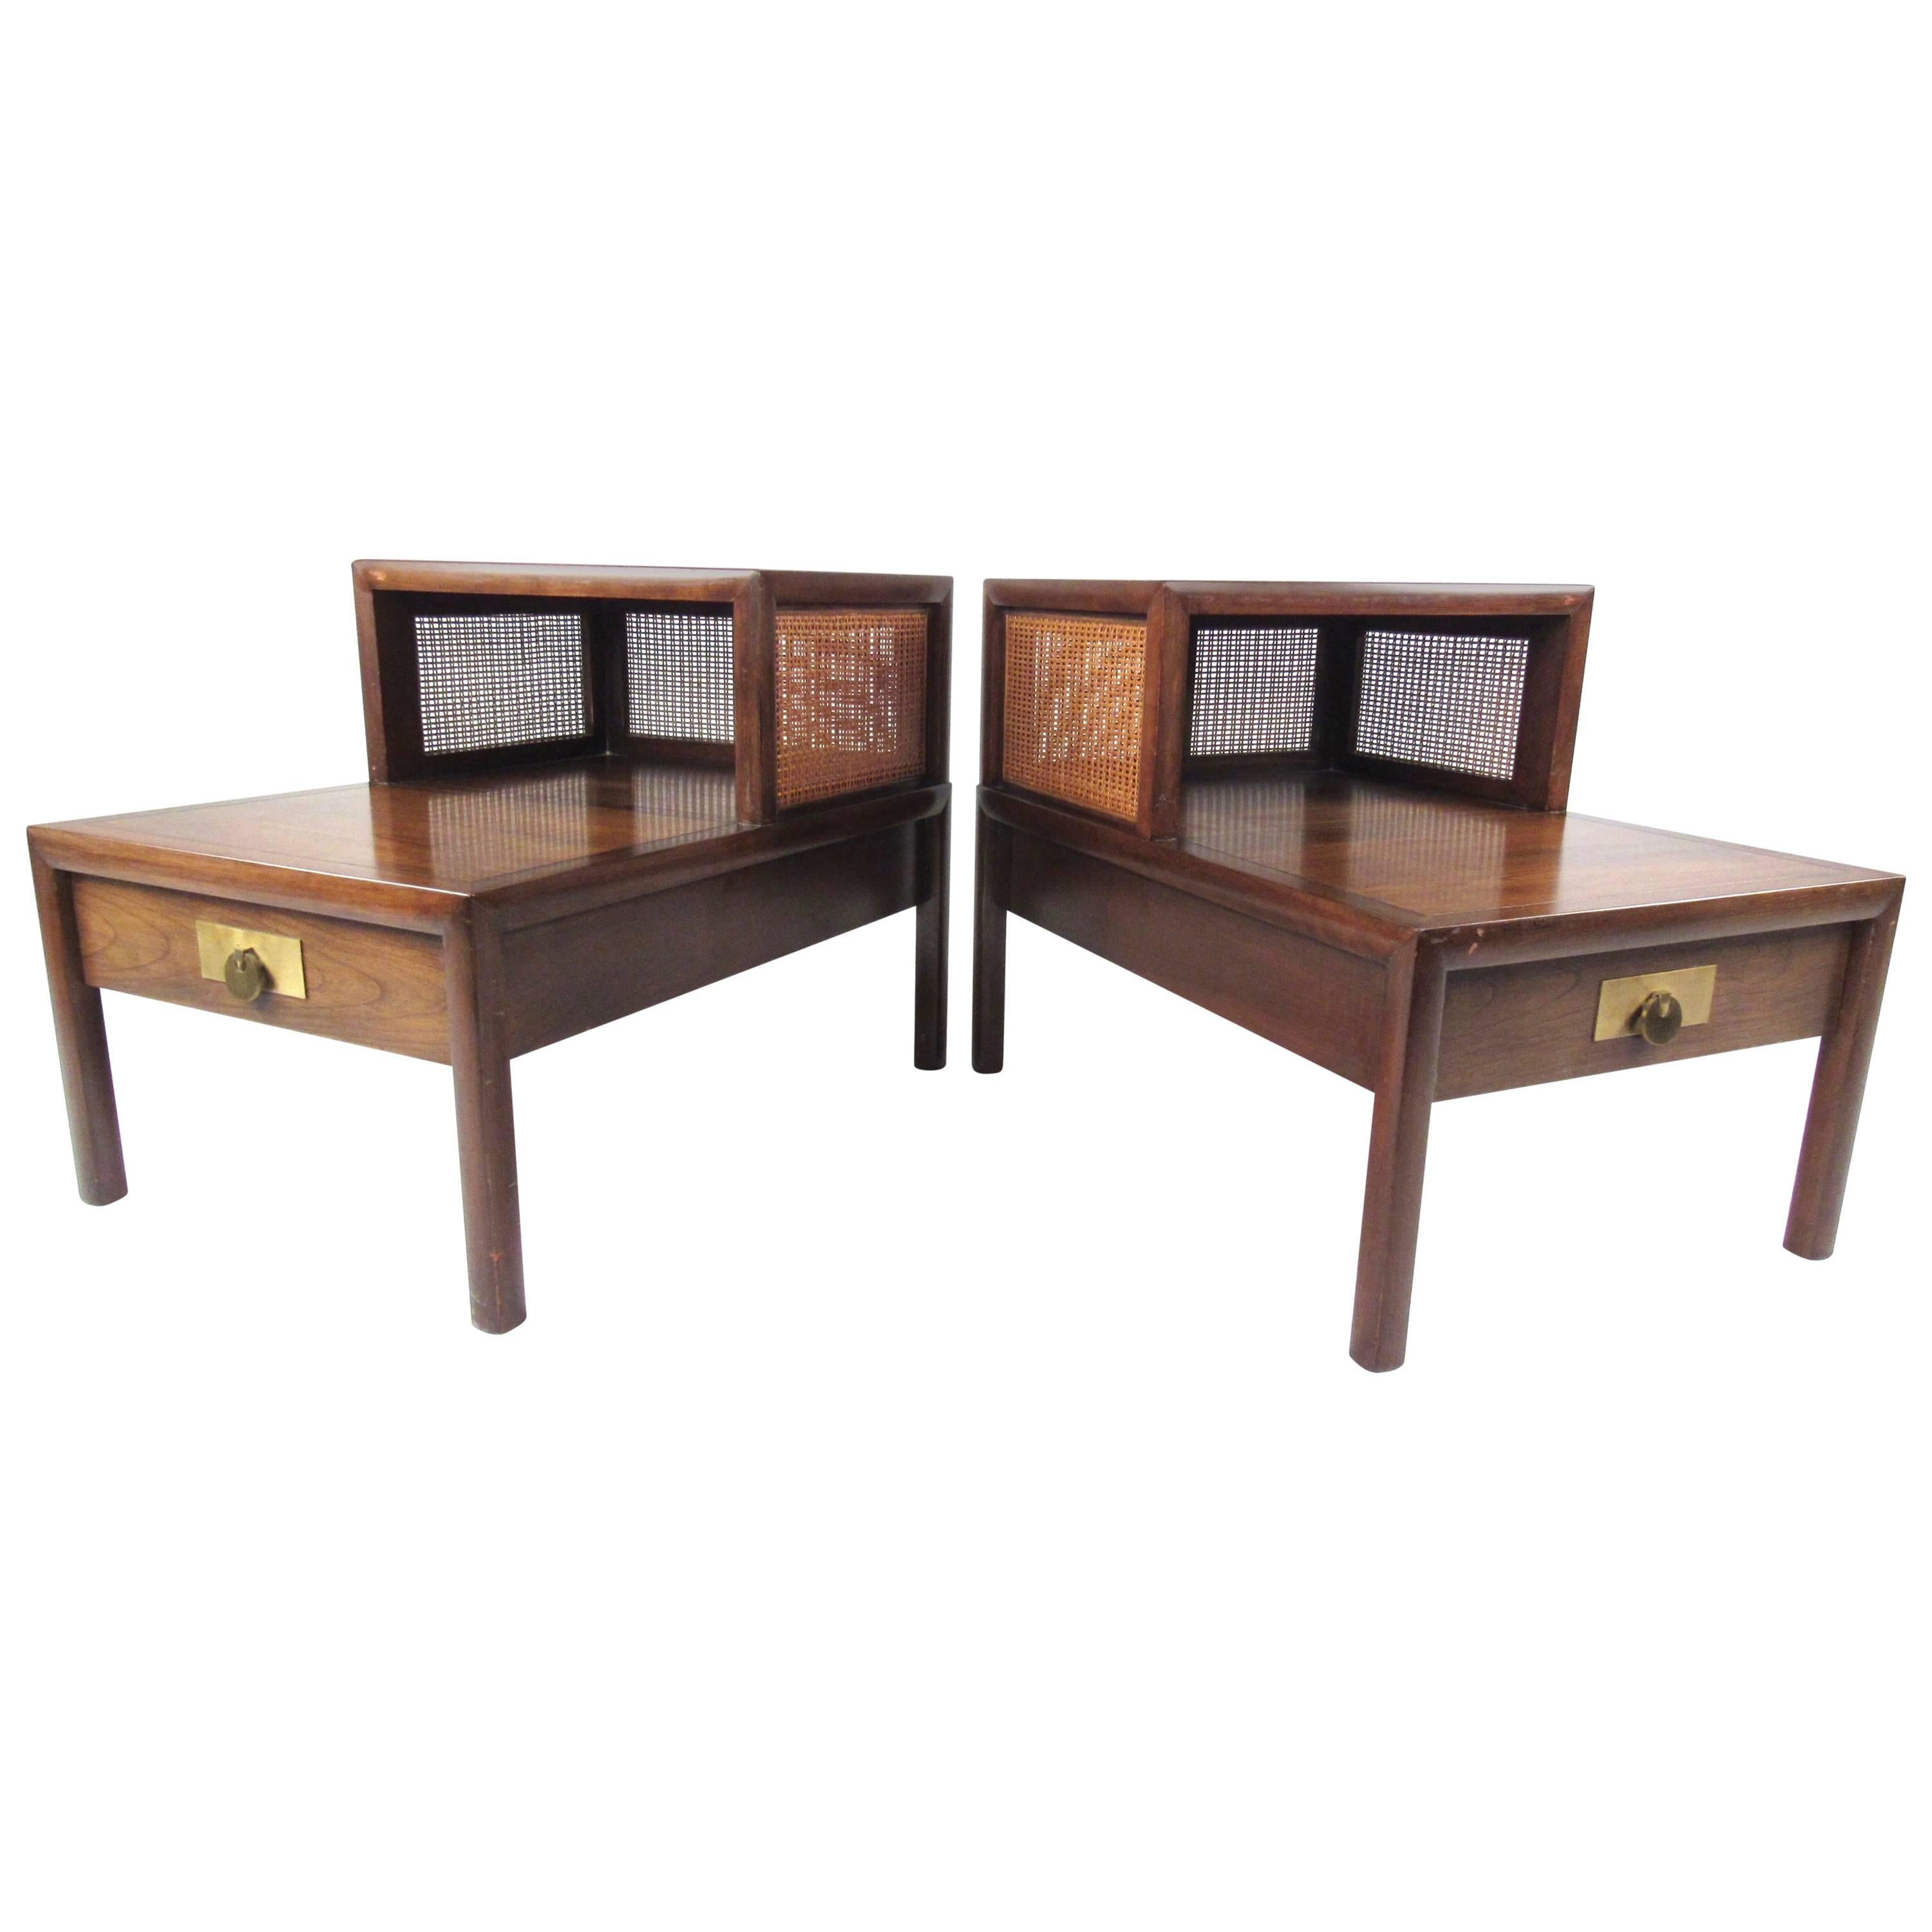 Pair of Mid-Century Modern Two-Tier Cane and Walnut Lamp Tables by Baker